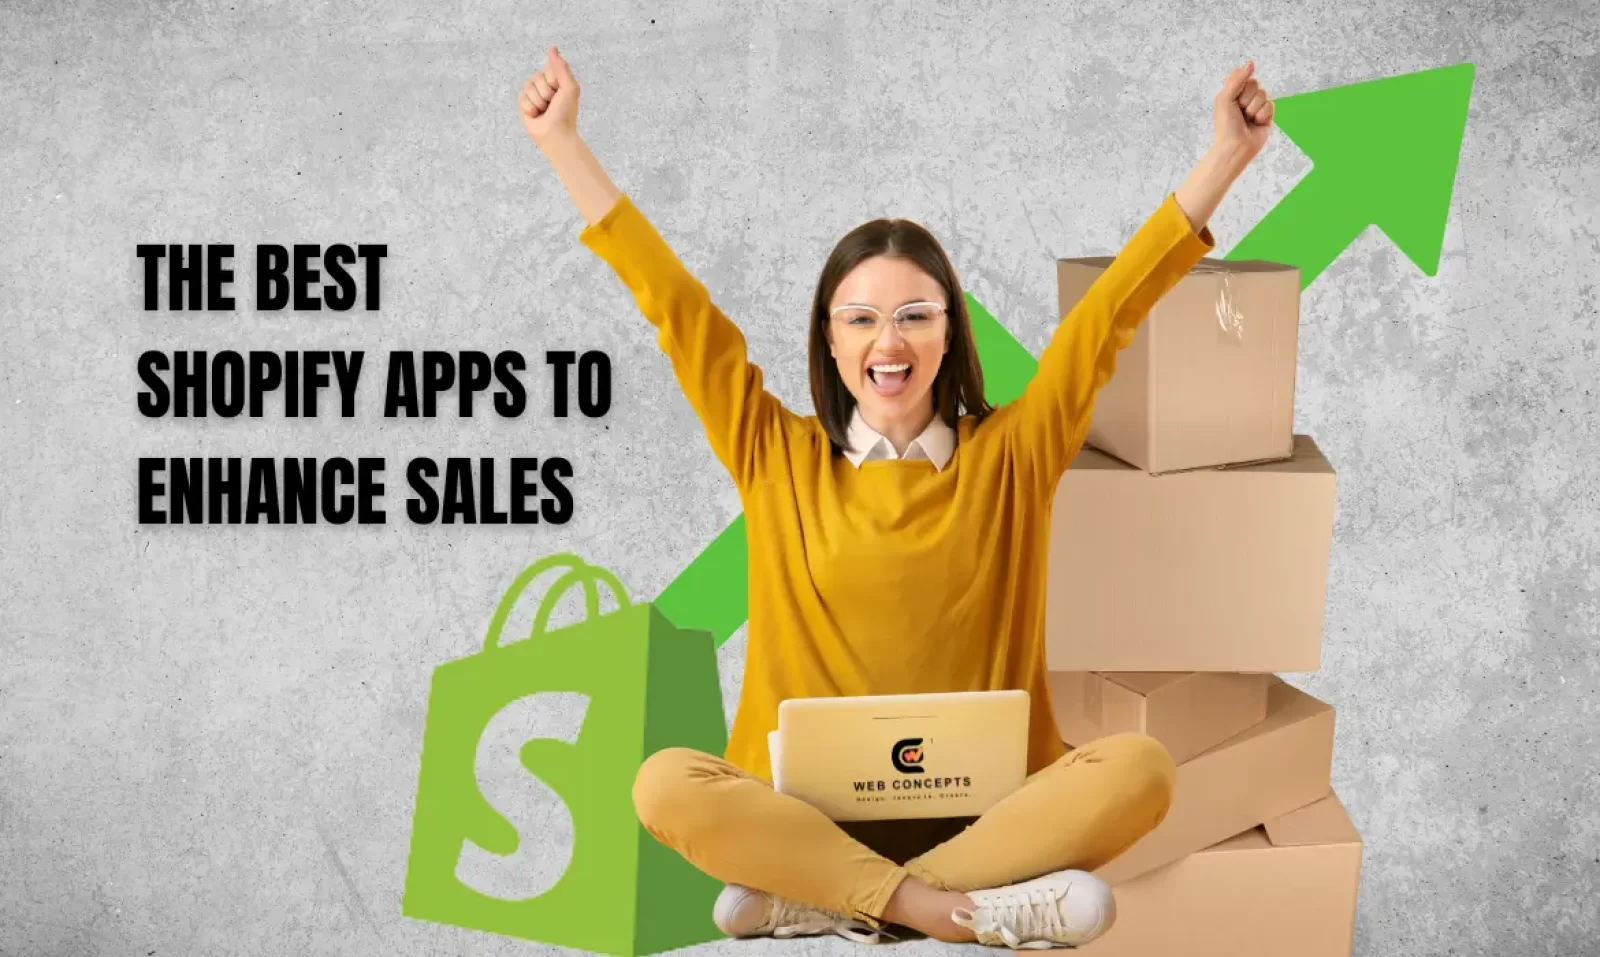 THE BEST SHOPIFY APPS TO ENHANCE SALES